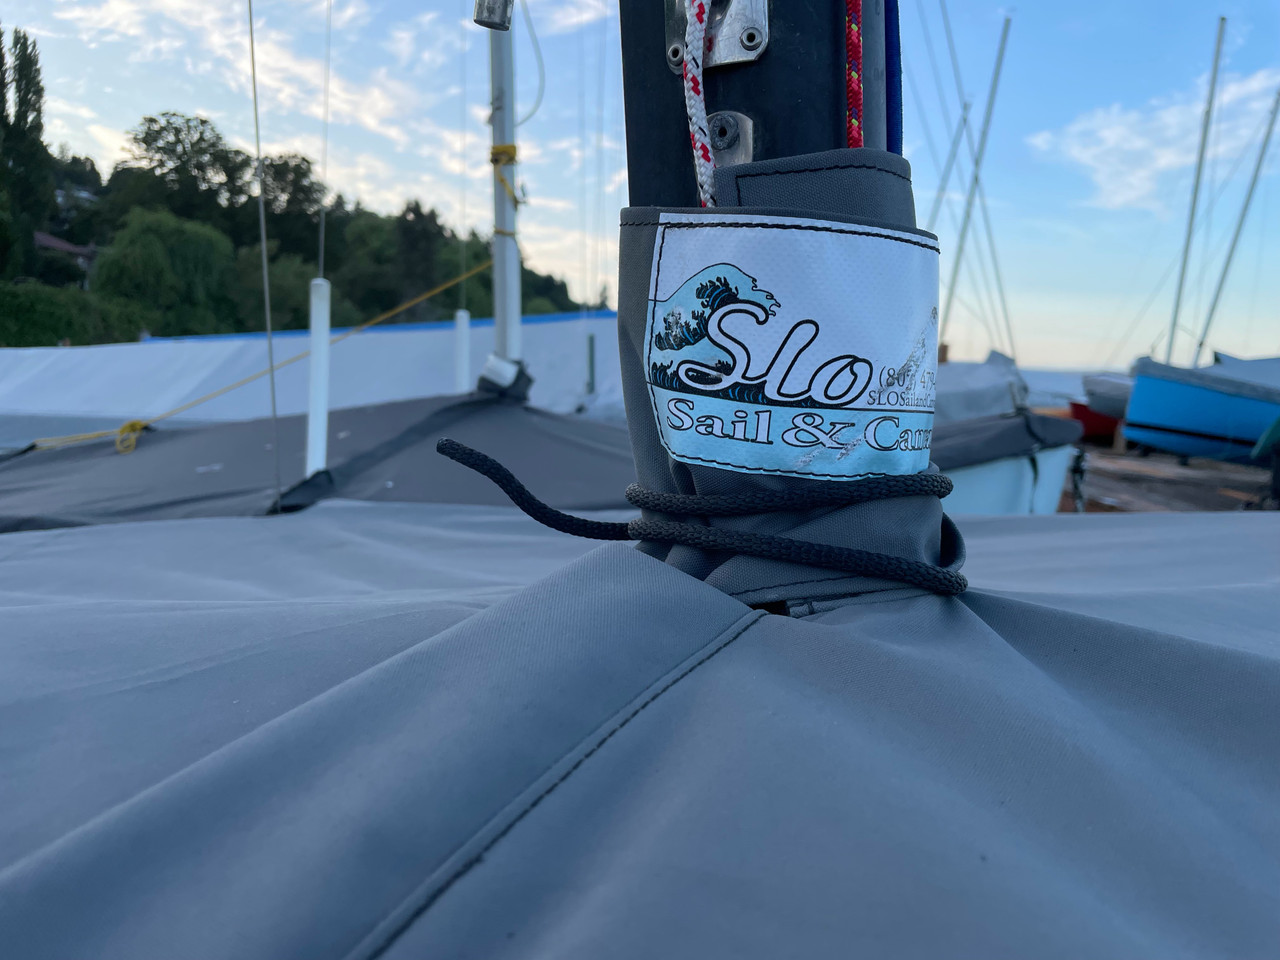 A mast collar and perfectly placed shroud cutouts fit tightly around your boats rigging. 